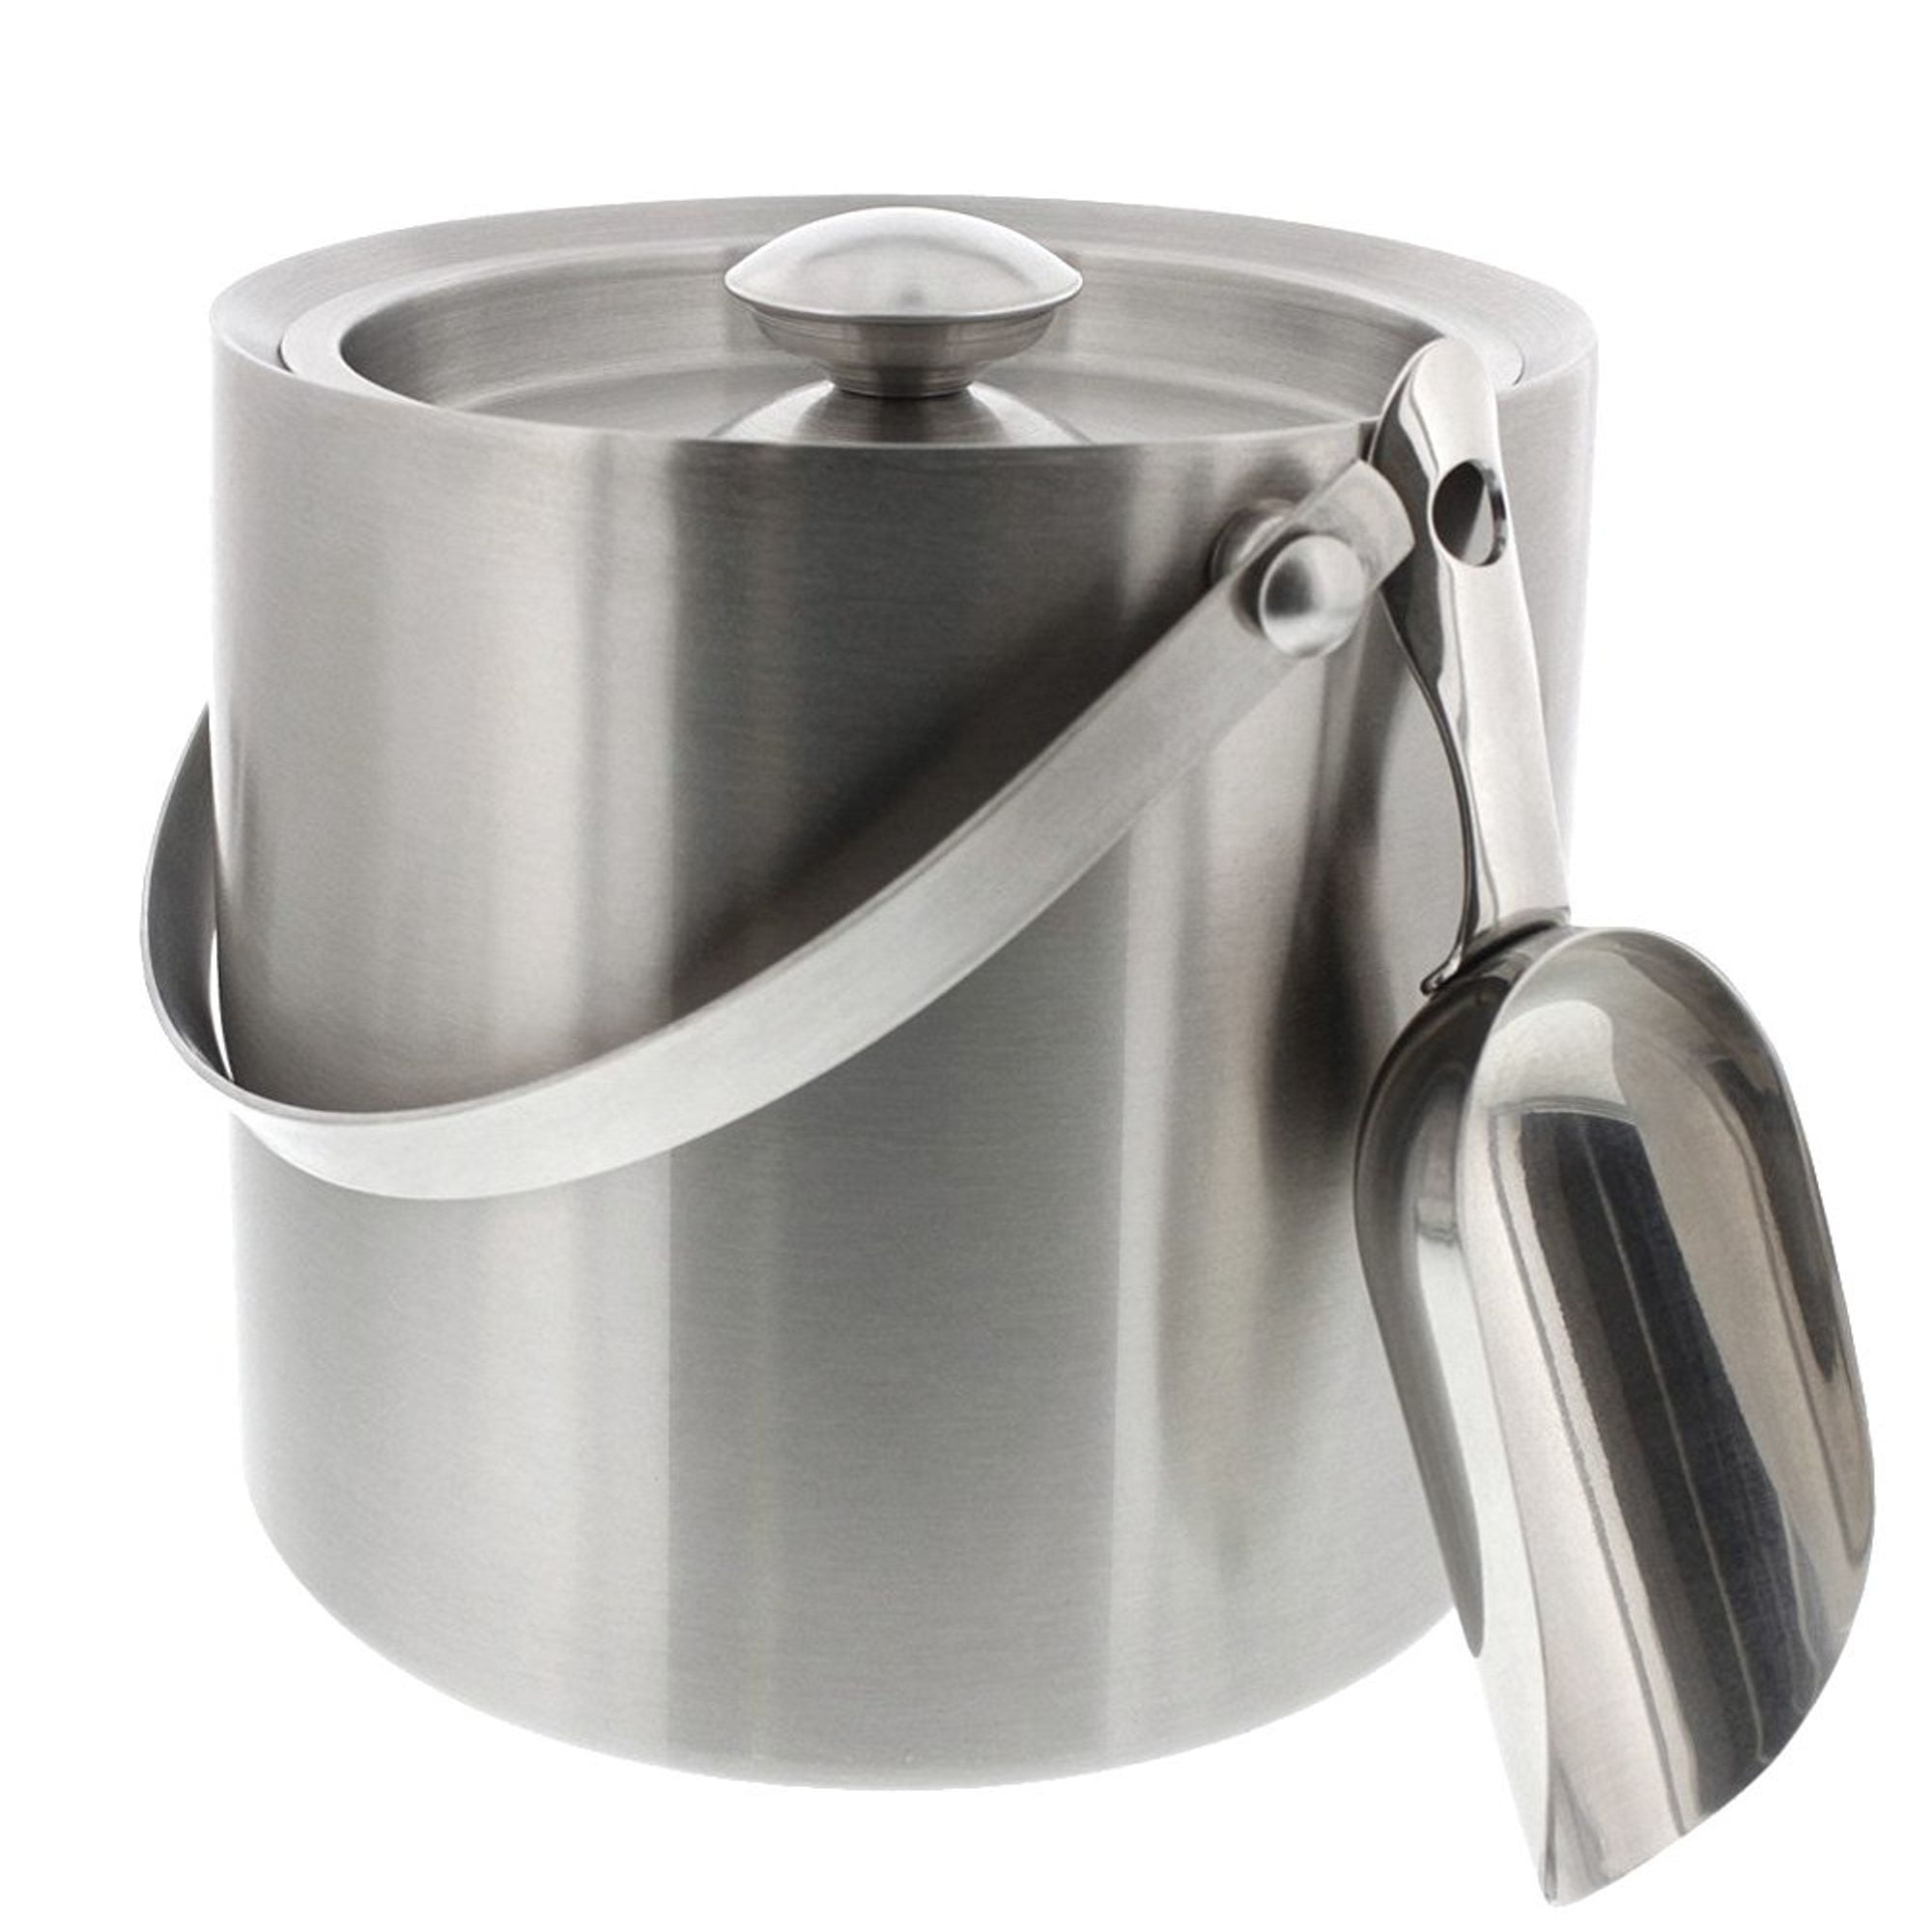 Oggi Stainless Steel Ice Bucket With Tongs 3 LT for sale online 